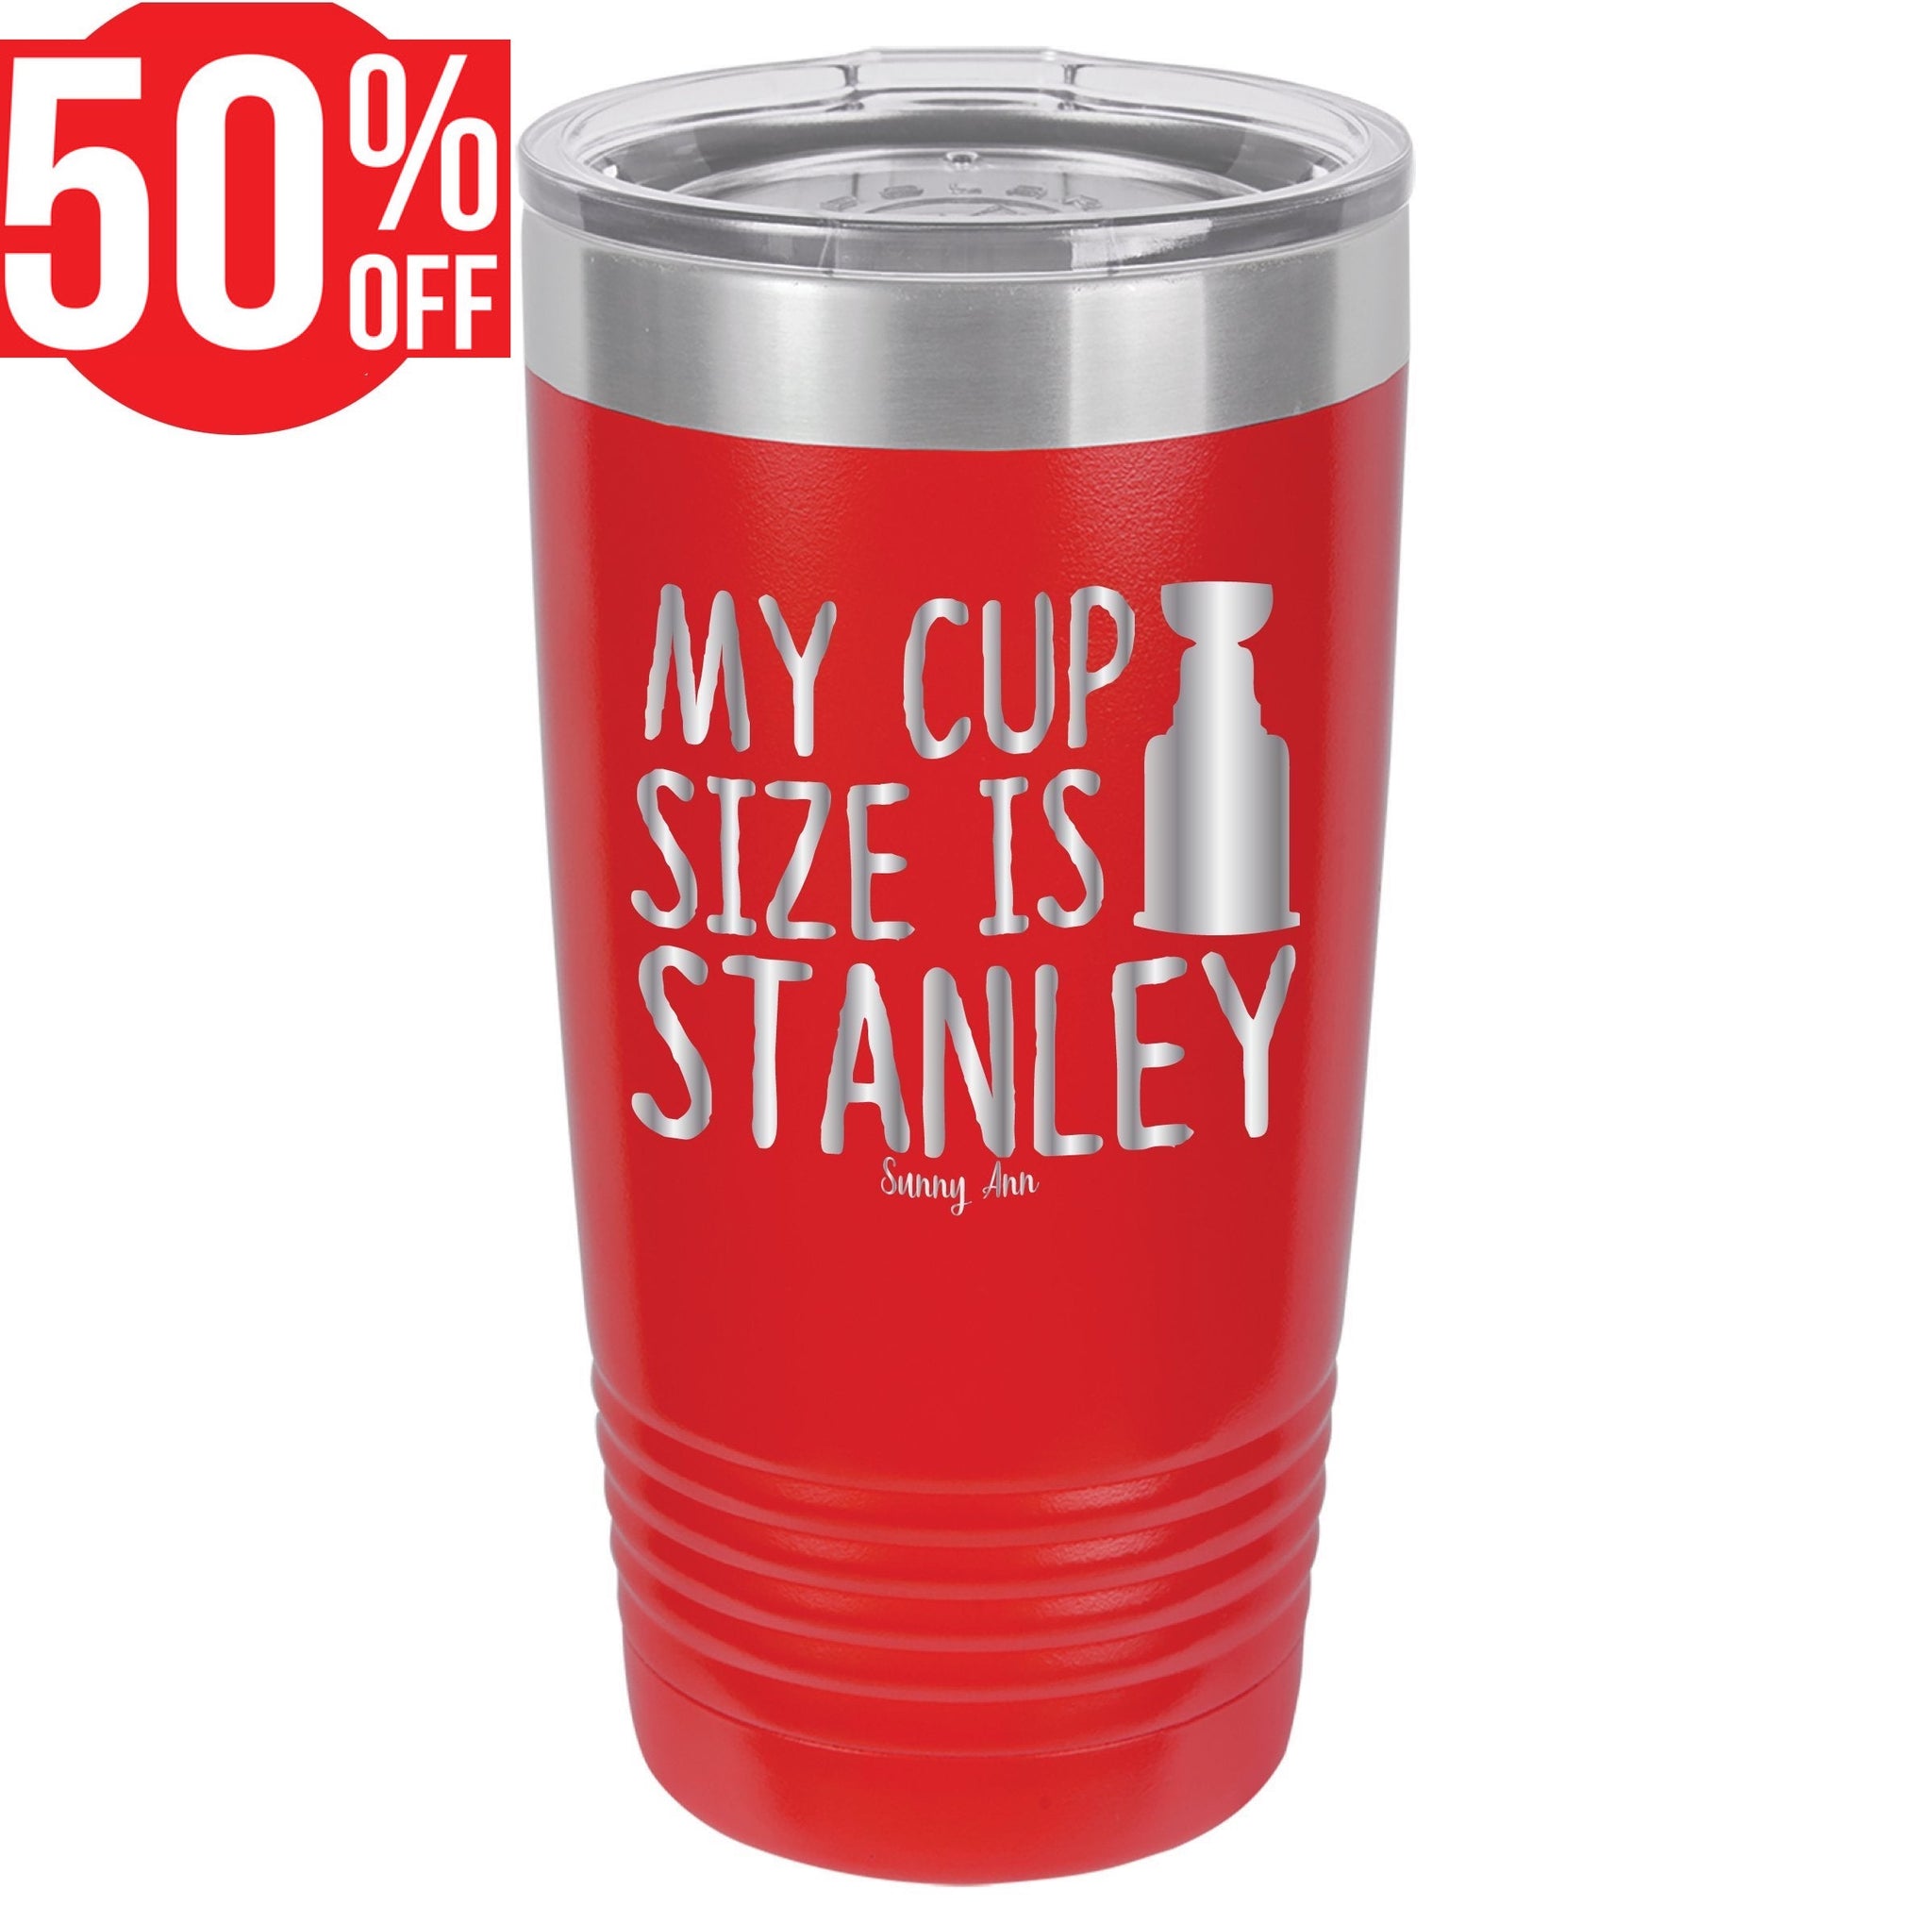 The 20 oz stanley is so cute🥹🌸🌷✨ #stanleycup #shopping